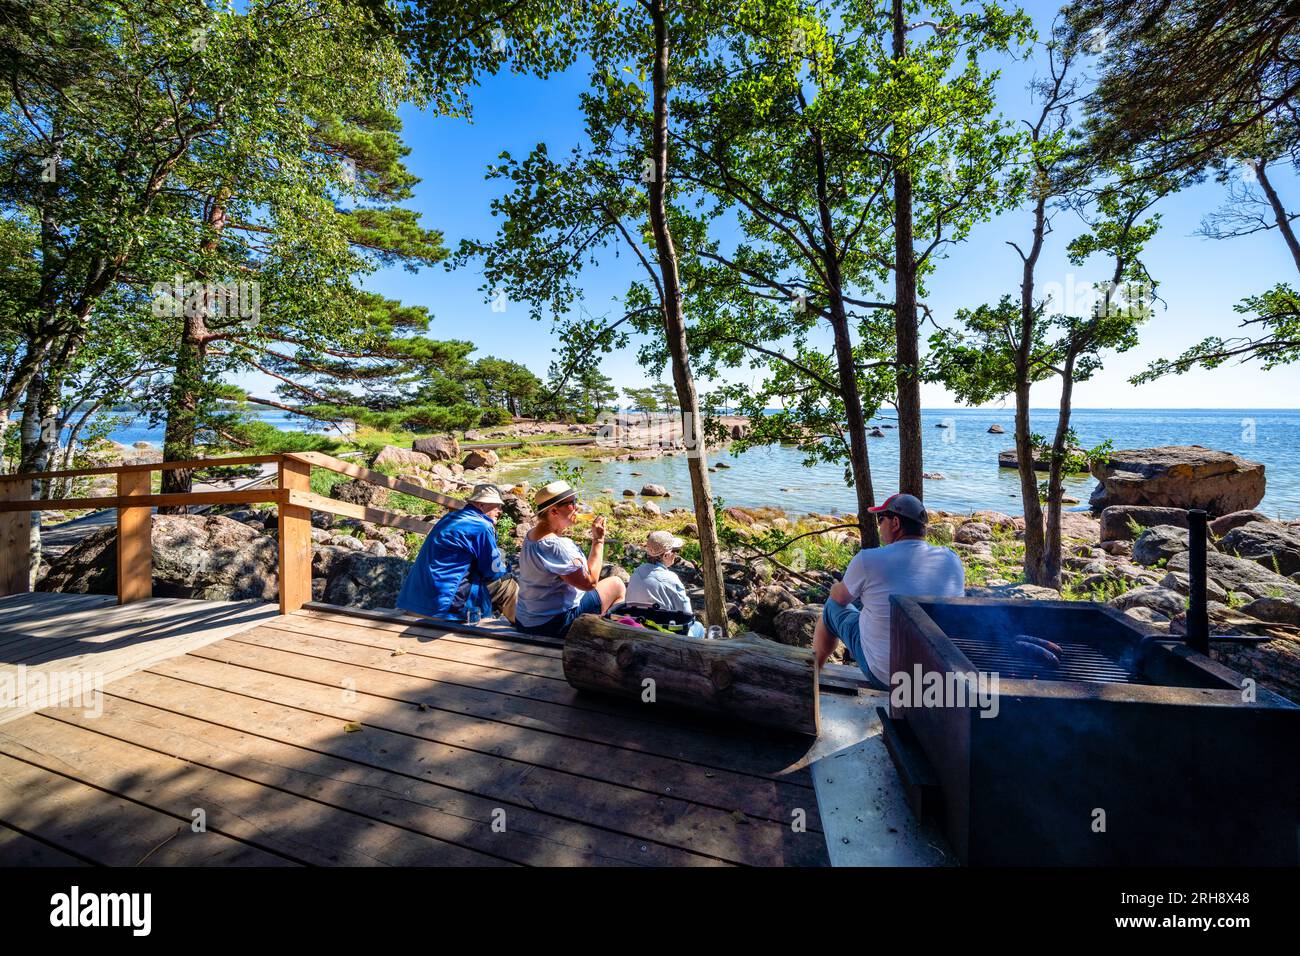 A sunny day at Varlaxudden recreation area in Porvoo, Finland Stock Photo